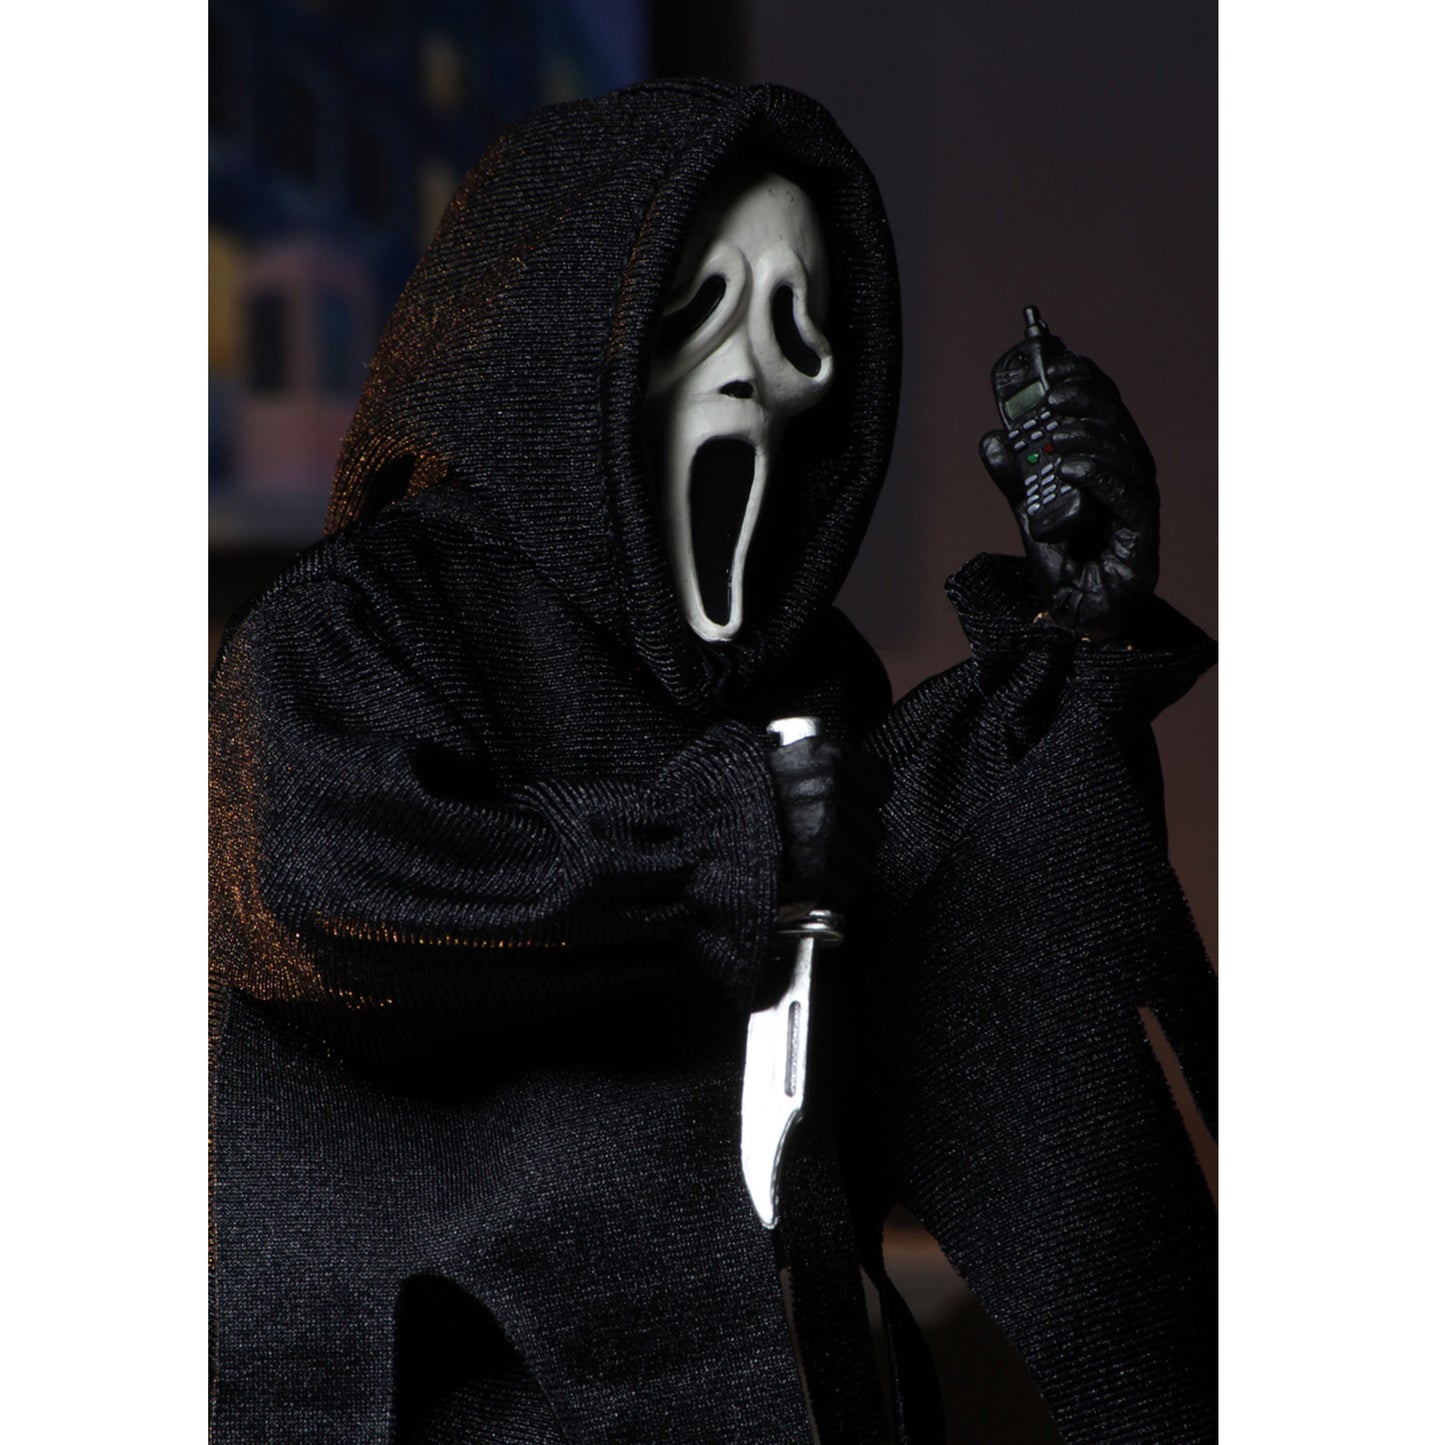 Load image into Gallery viewer, Ghostface (Scream) NECA Clothed Action Figure
